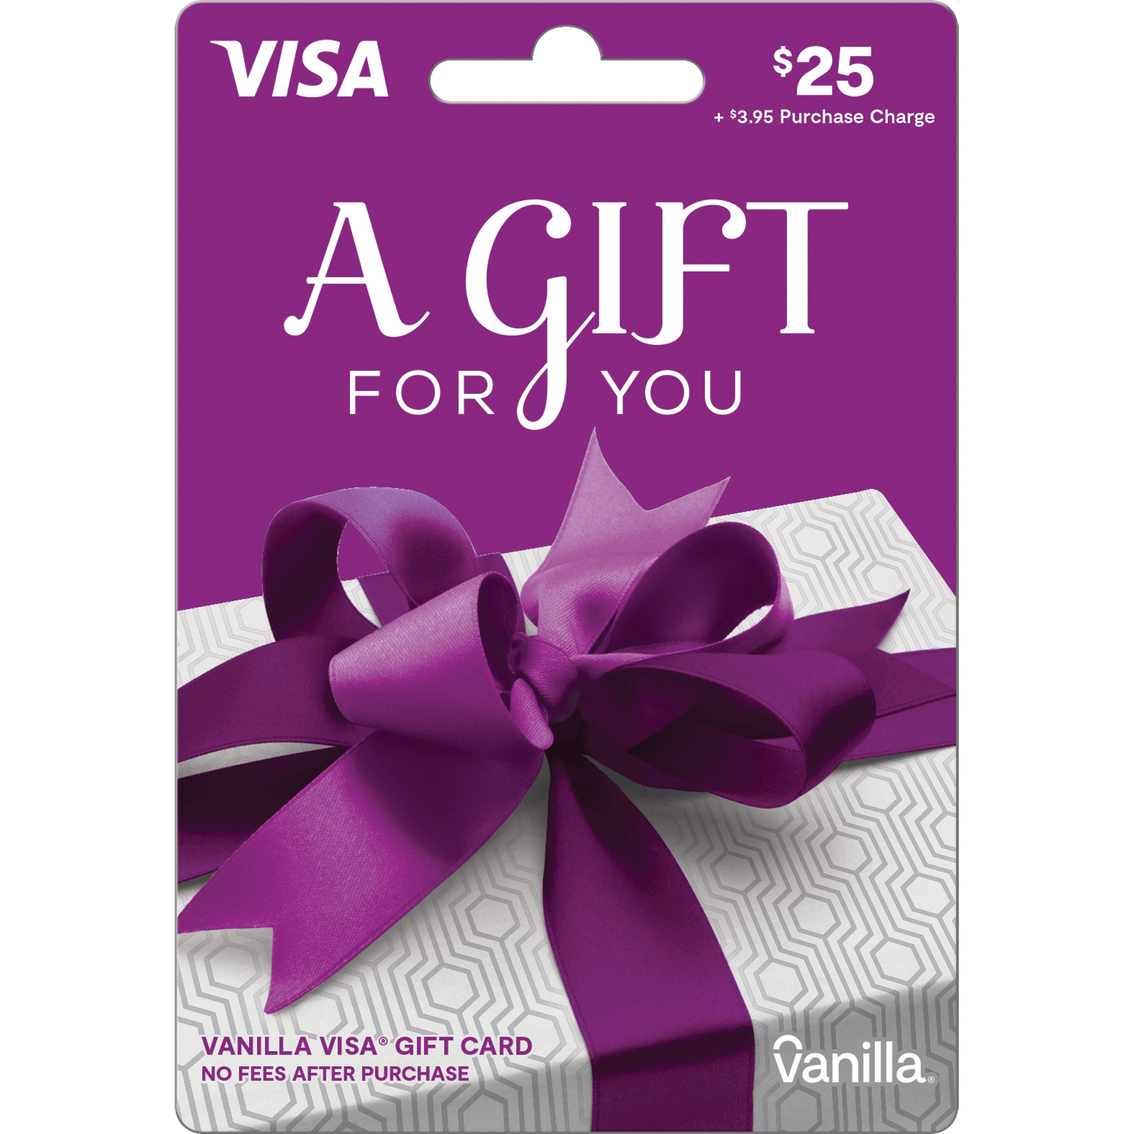 Vanilla Visa Metallic Pattern Gift Exchange Shop Activation | + Food | Fee Card Cards | Gift $25 & Gifts The